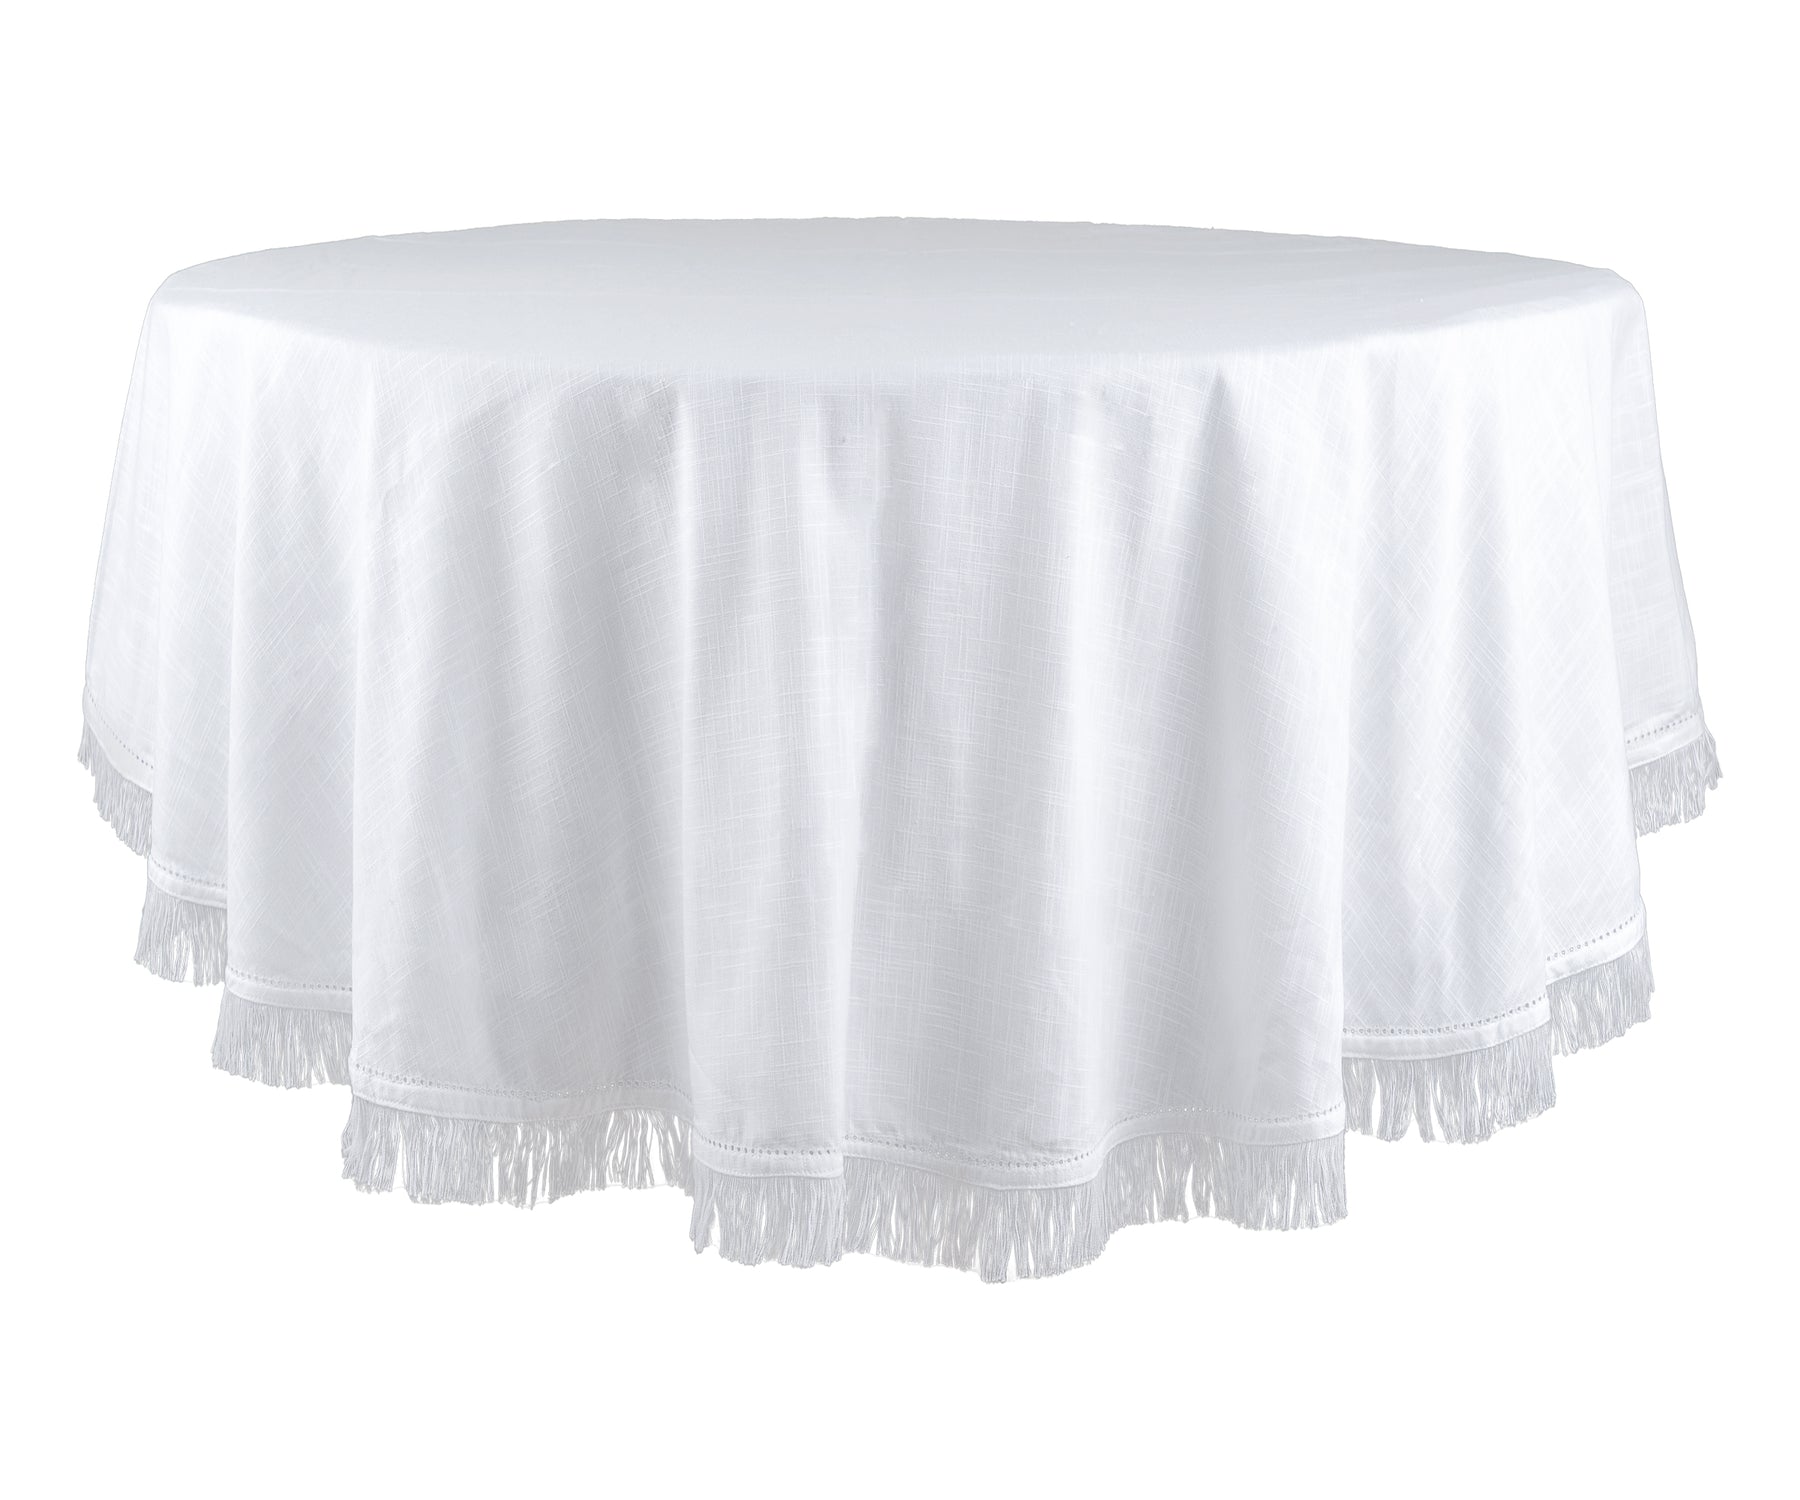 The charm of a white tablecloth lies in its pristine simplicity. It evokes a sense of purity and sophistication, making it a timeless choice for formal occasions or casual gatherings.